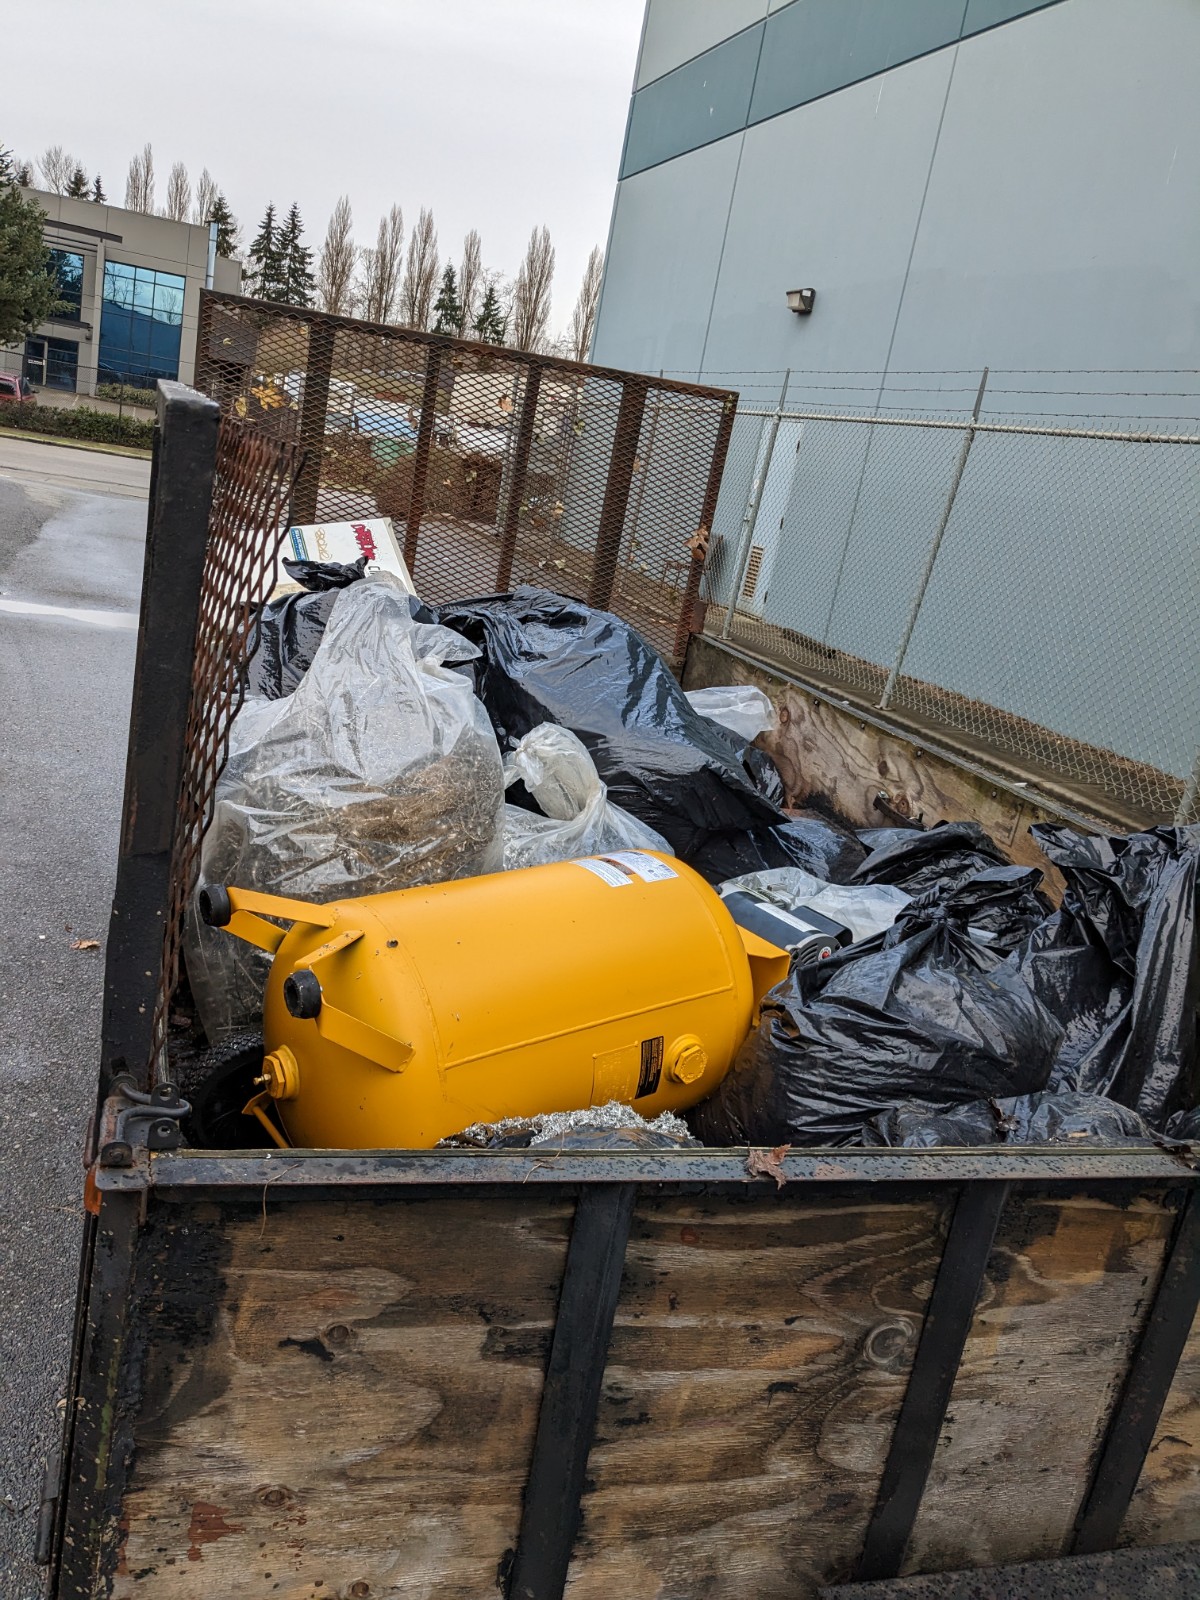 junk removal vancouver